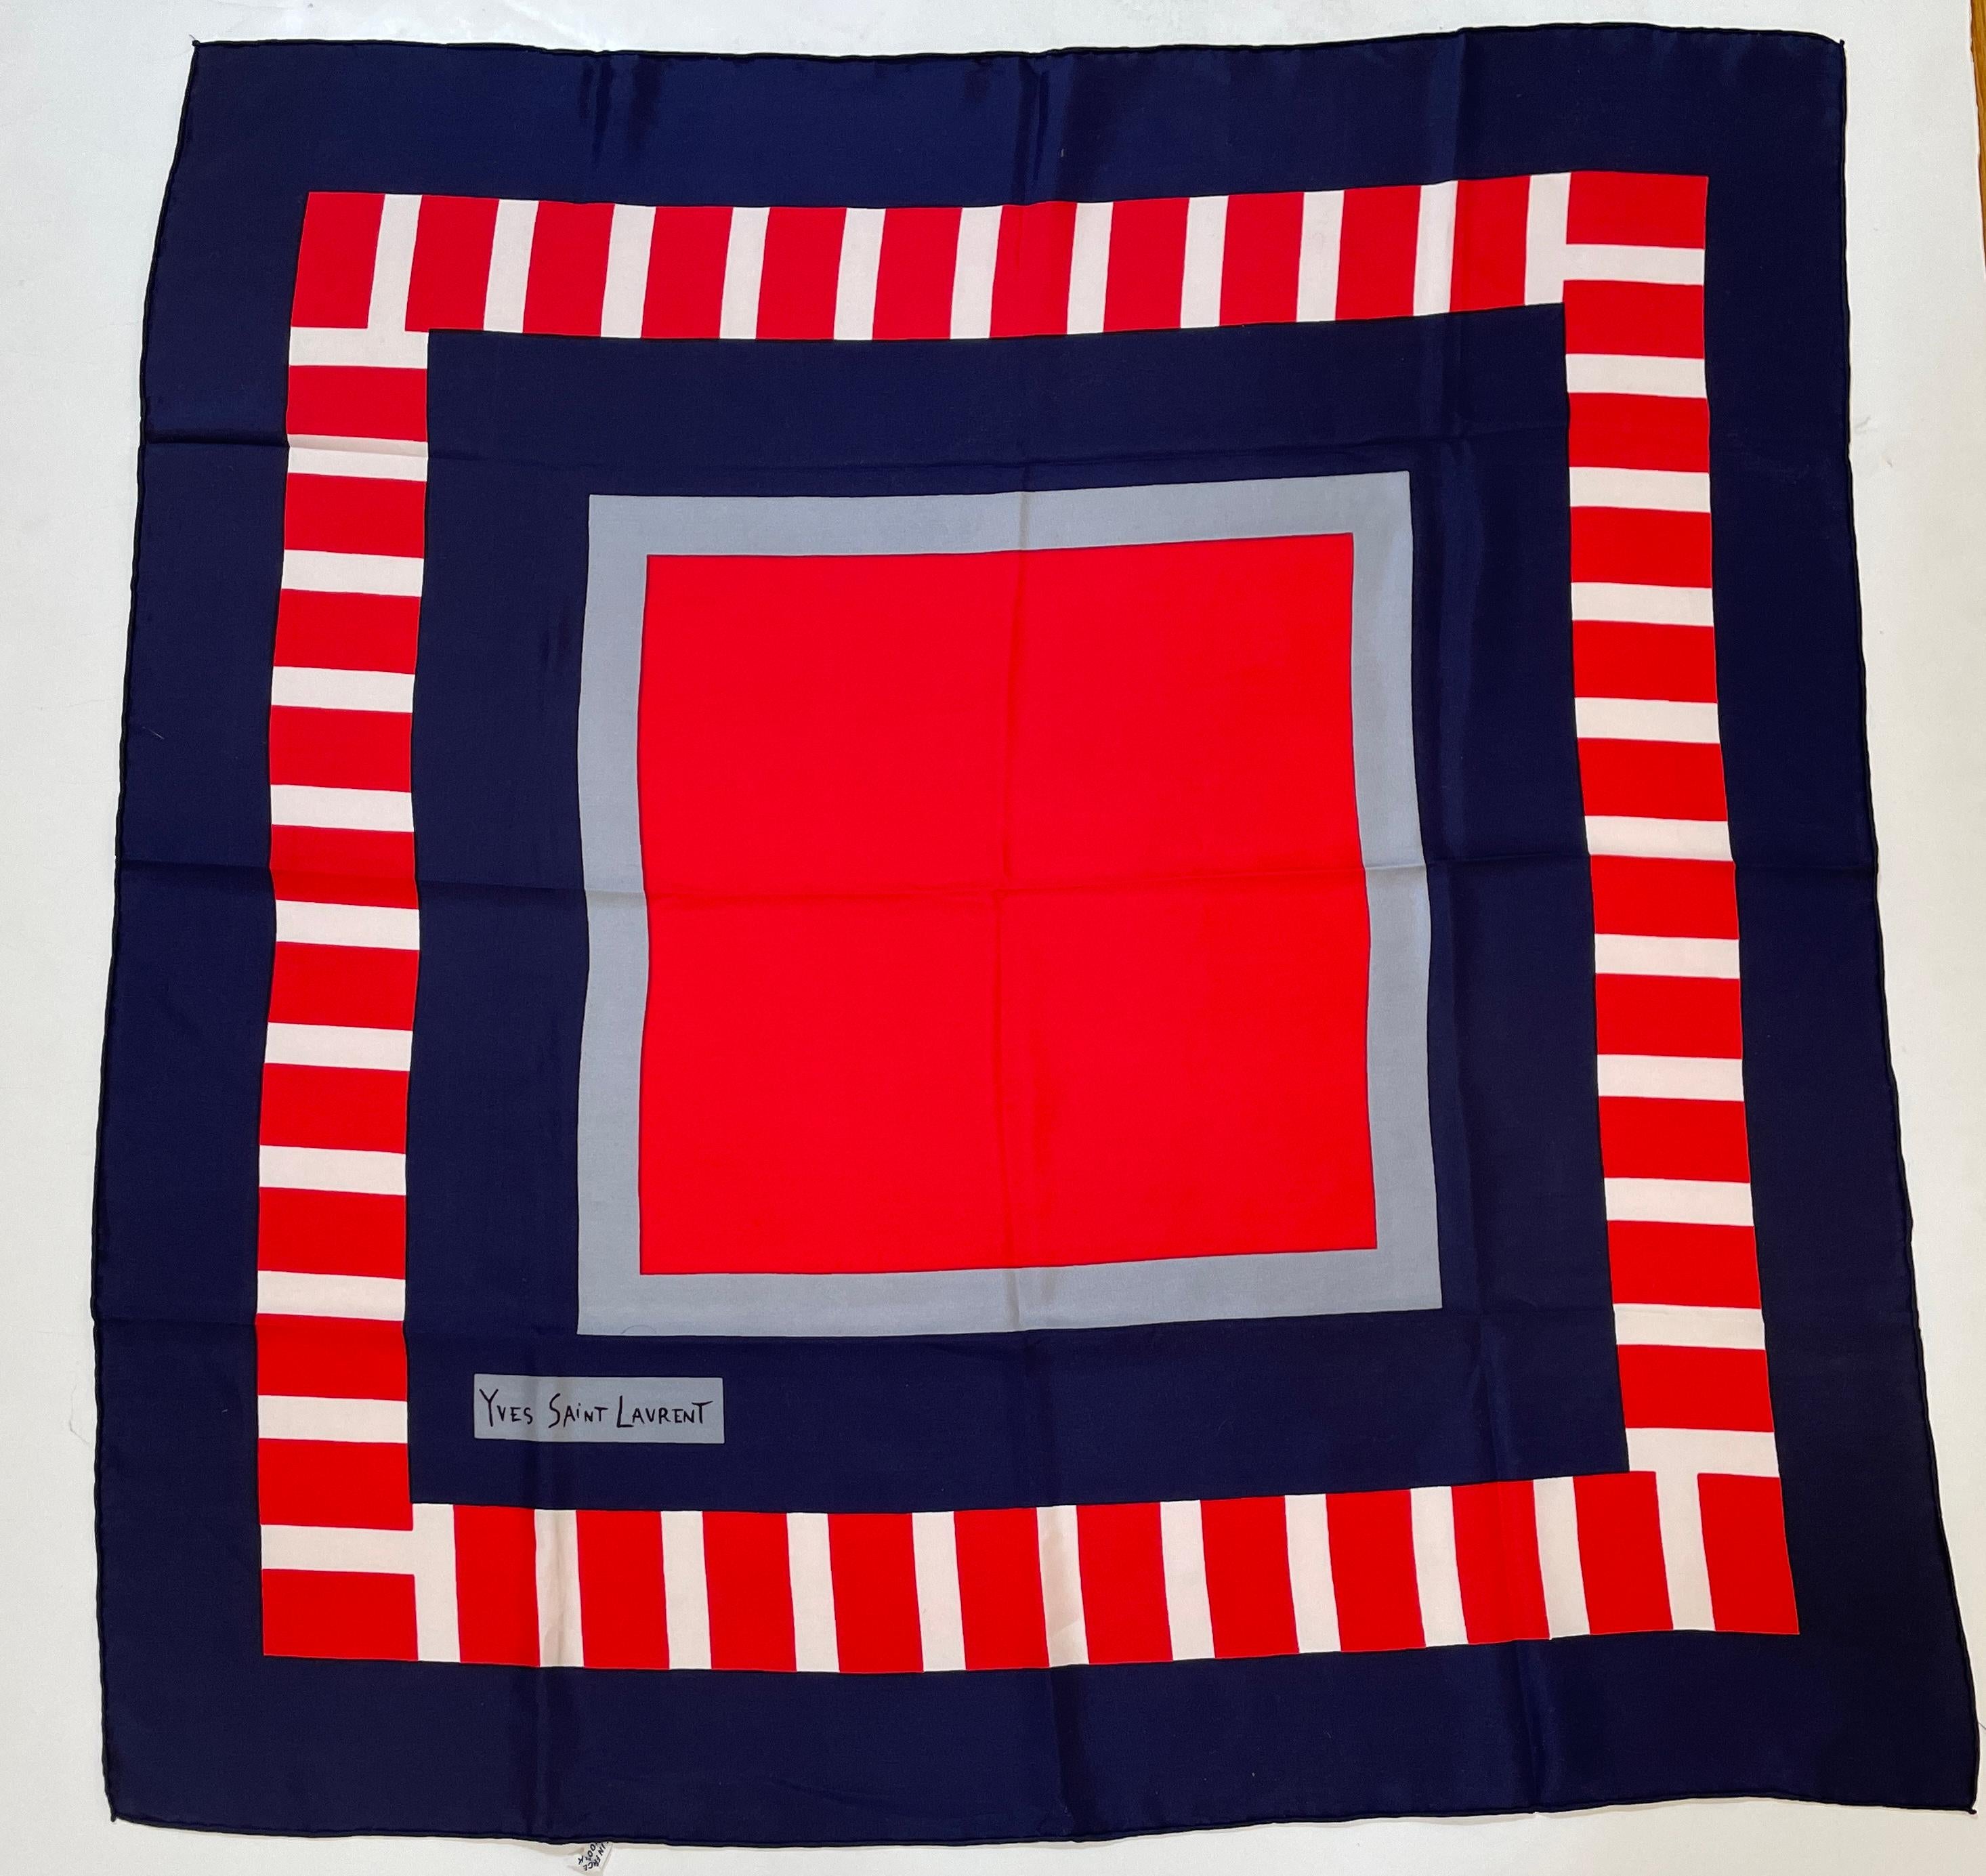 Yves Saint Laurent Bold Silk Crepe de Chine Multi-Color Abstract Scarf 1980s.
Yves Saint Laurent wonderful bold multi-color bold abstract silk crepe de chine scarf.
Mondrian style post modern, blue red and gray geometric squares and line in red and